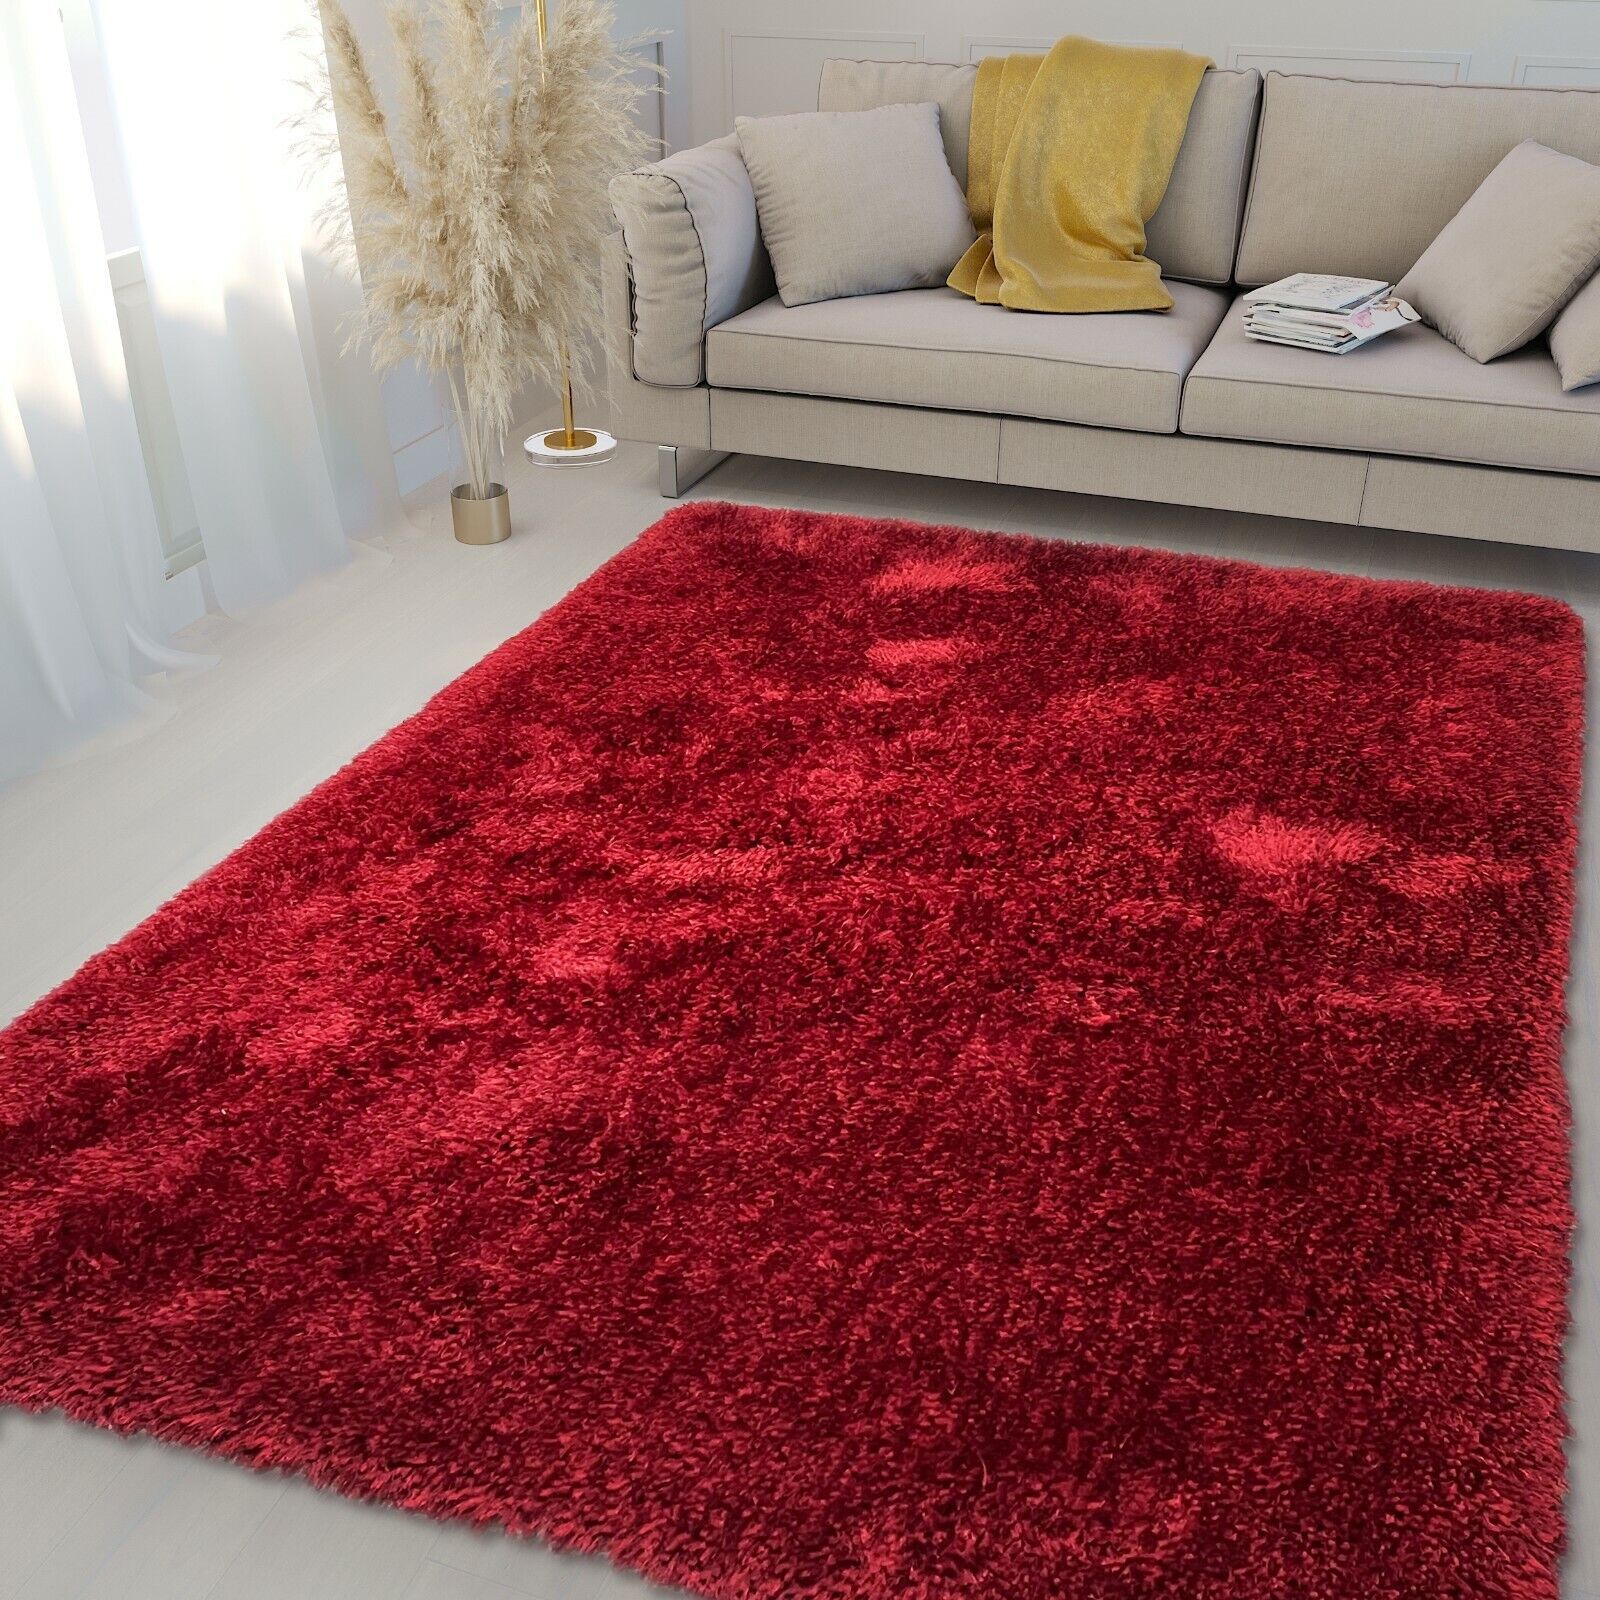 Red Shag Area Rug 5x7 Shaggy Carpet Solid Soft Plush Pile 749995692950 |  Ebay Intended For Red Solid Shag Rugs (View 14 of 15)